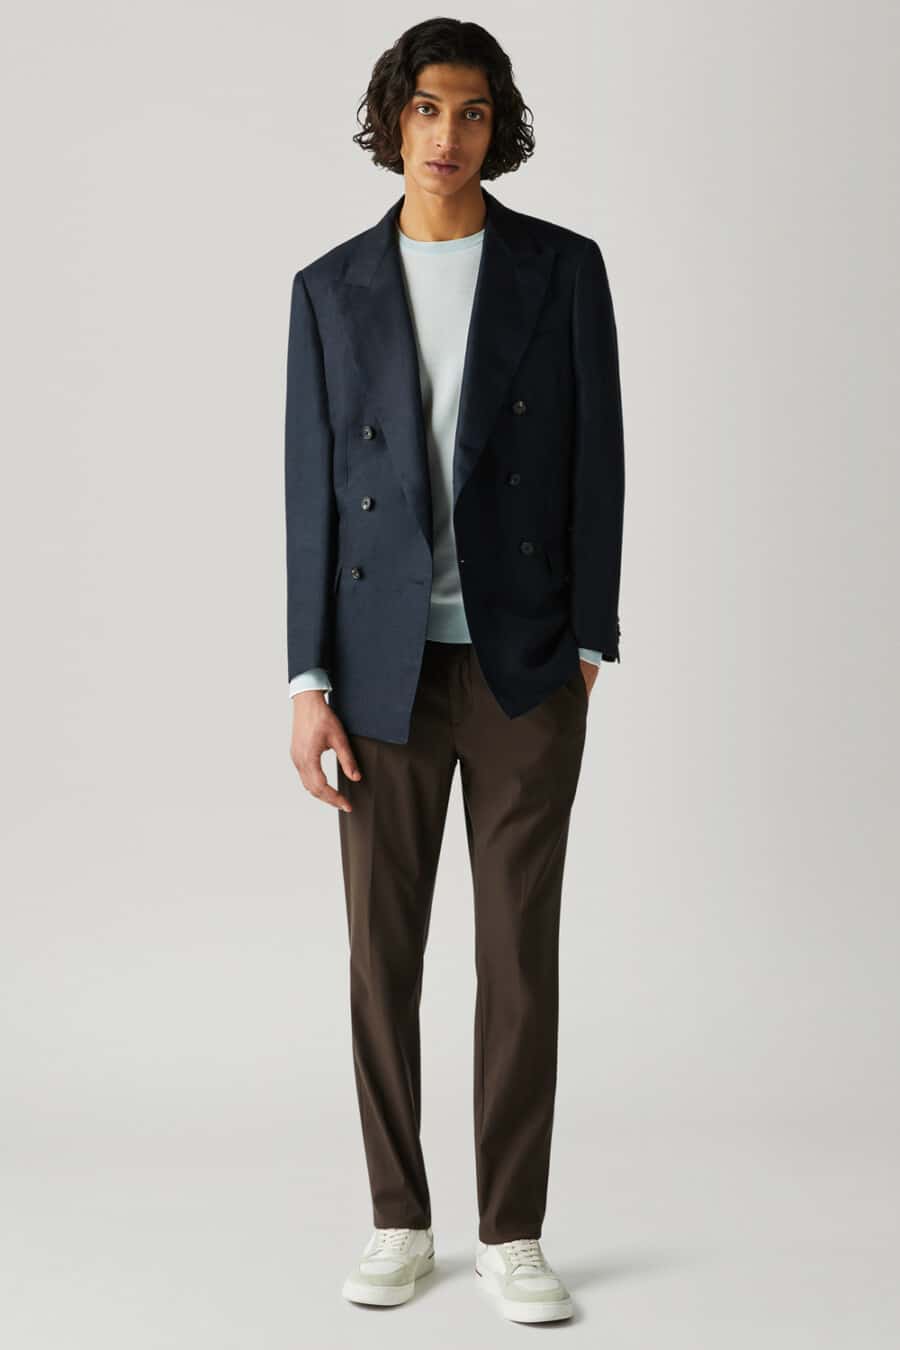 Men's Navy double-breasted blazer, sky blue T-shirt, dark brown pants and white sneakers outfit